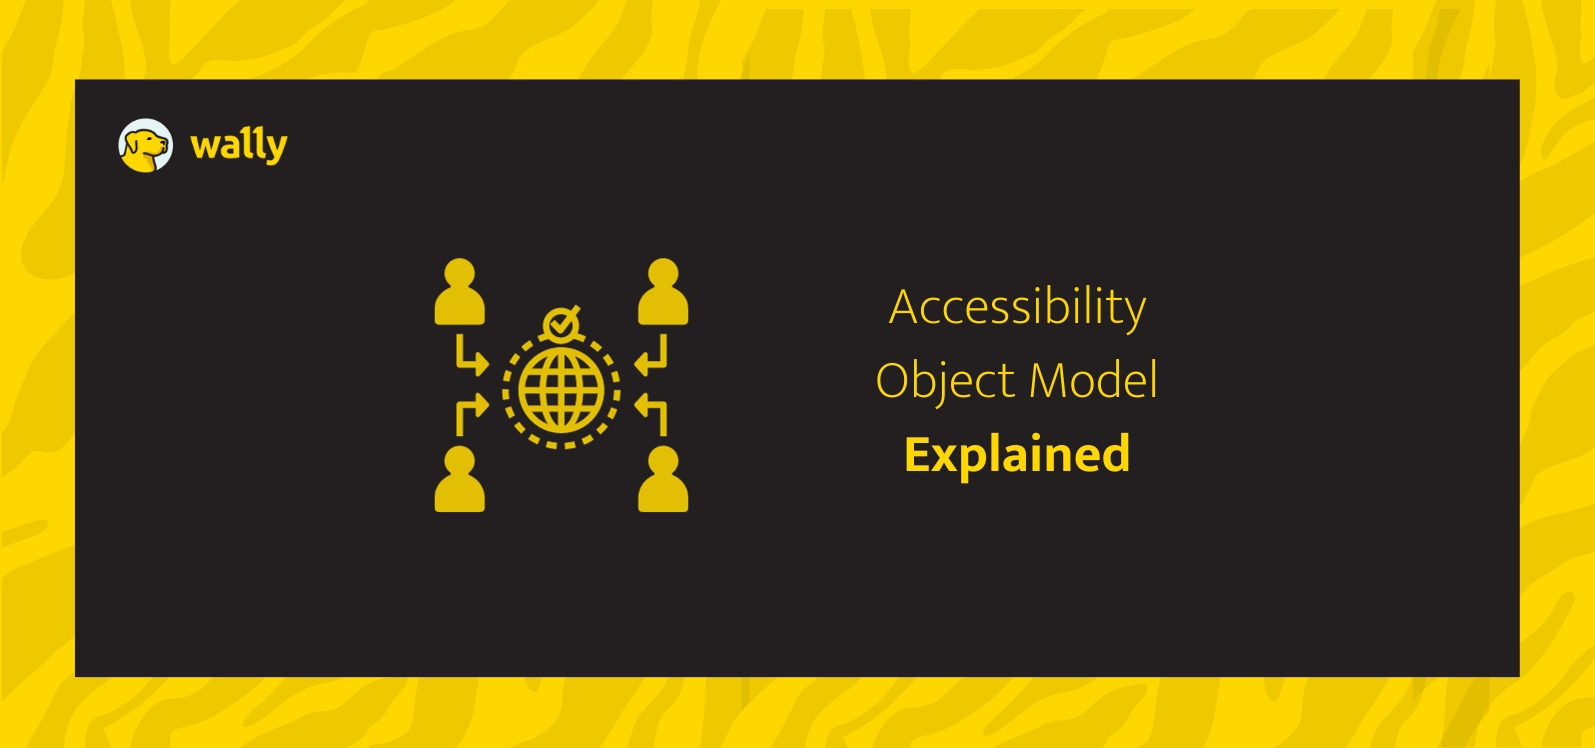 Accessibility Object Model Explained